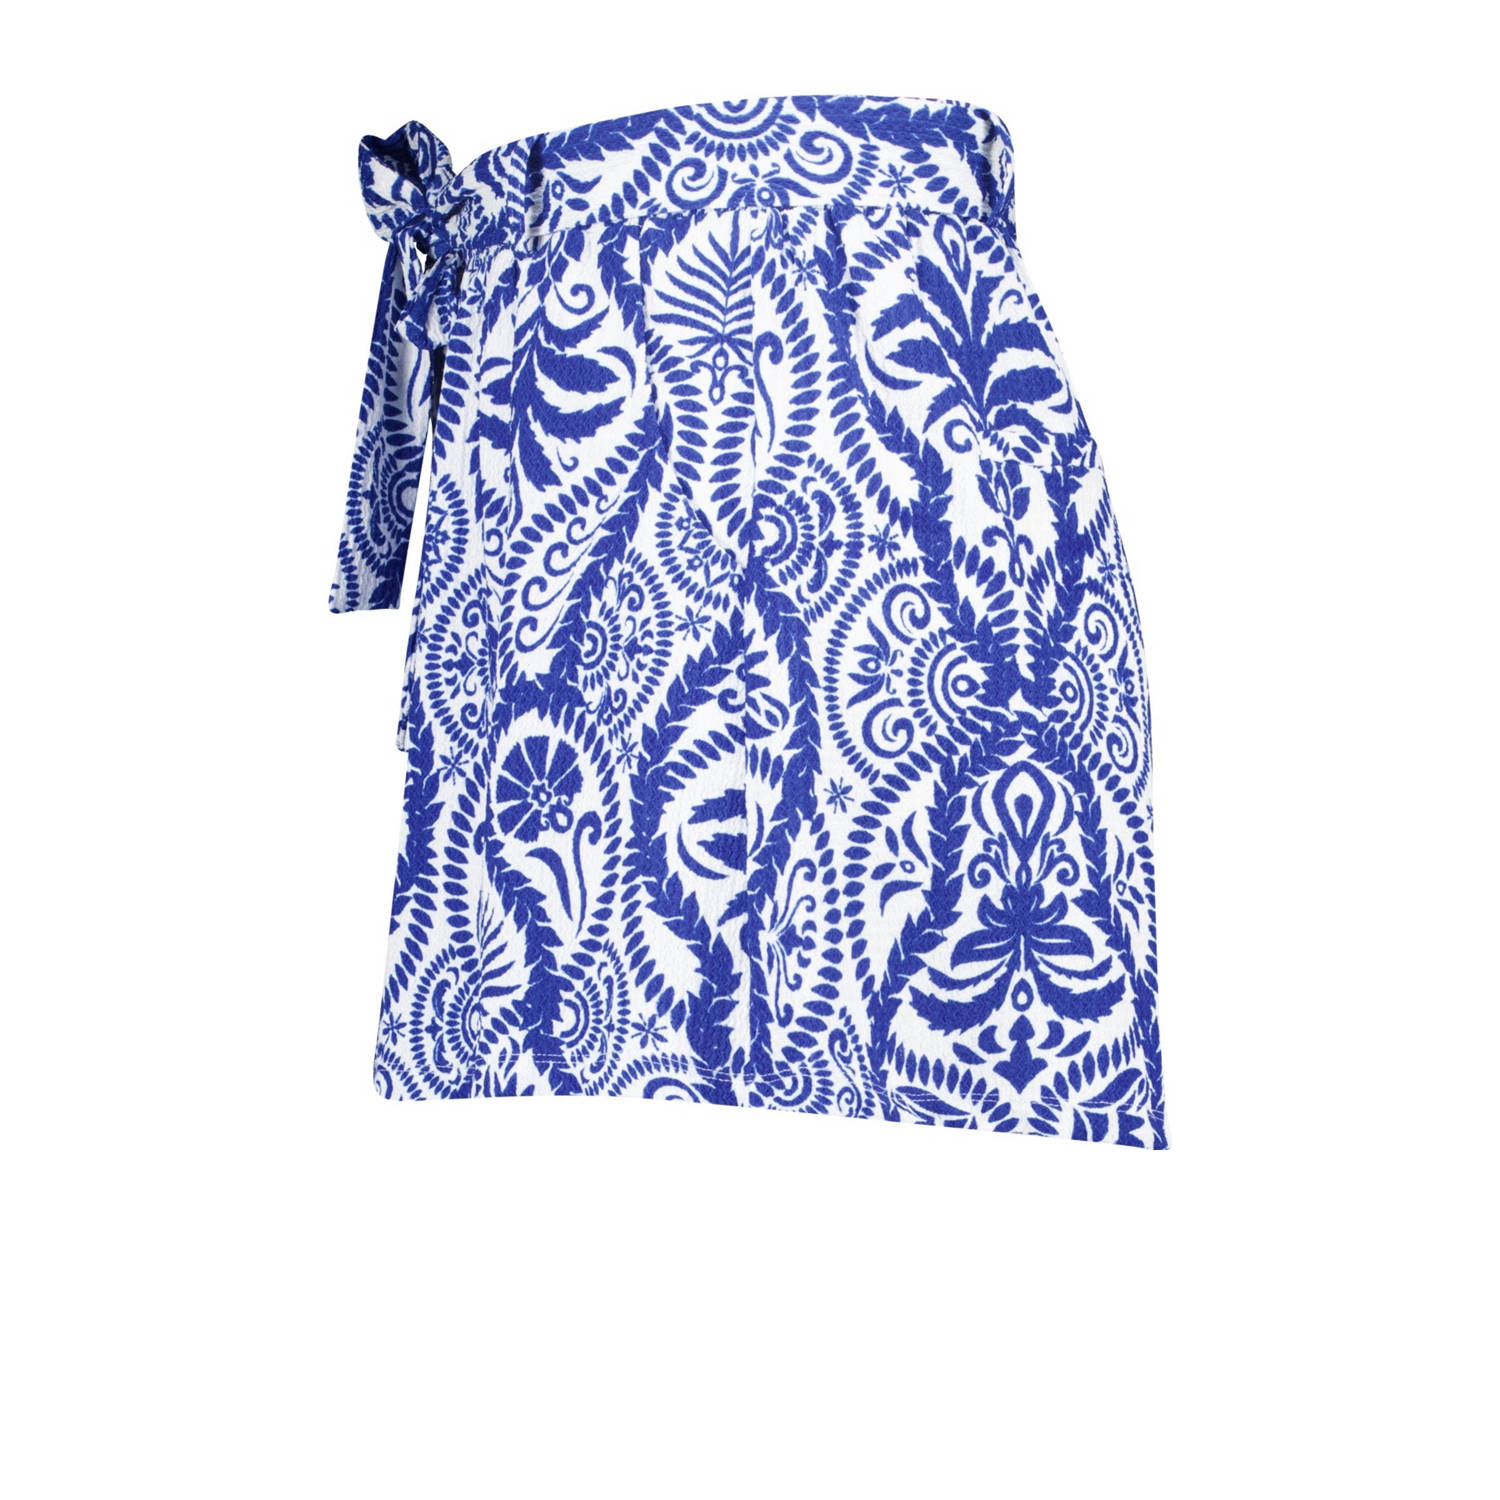 MS Mode high waist loose fit short met all over print blauw wit